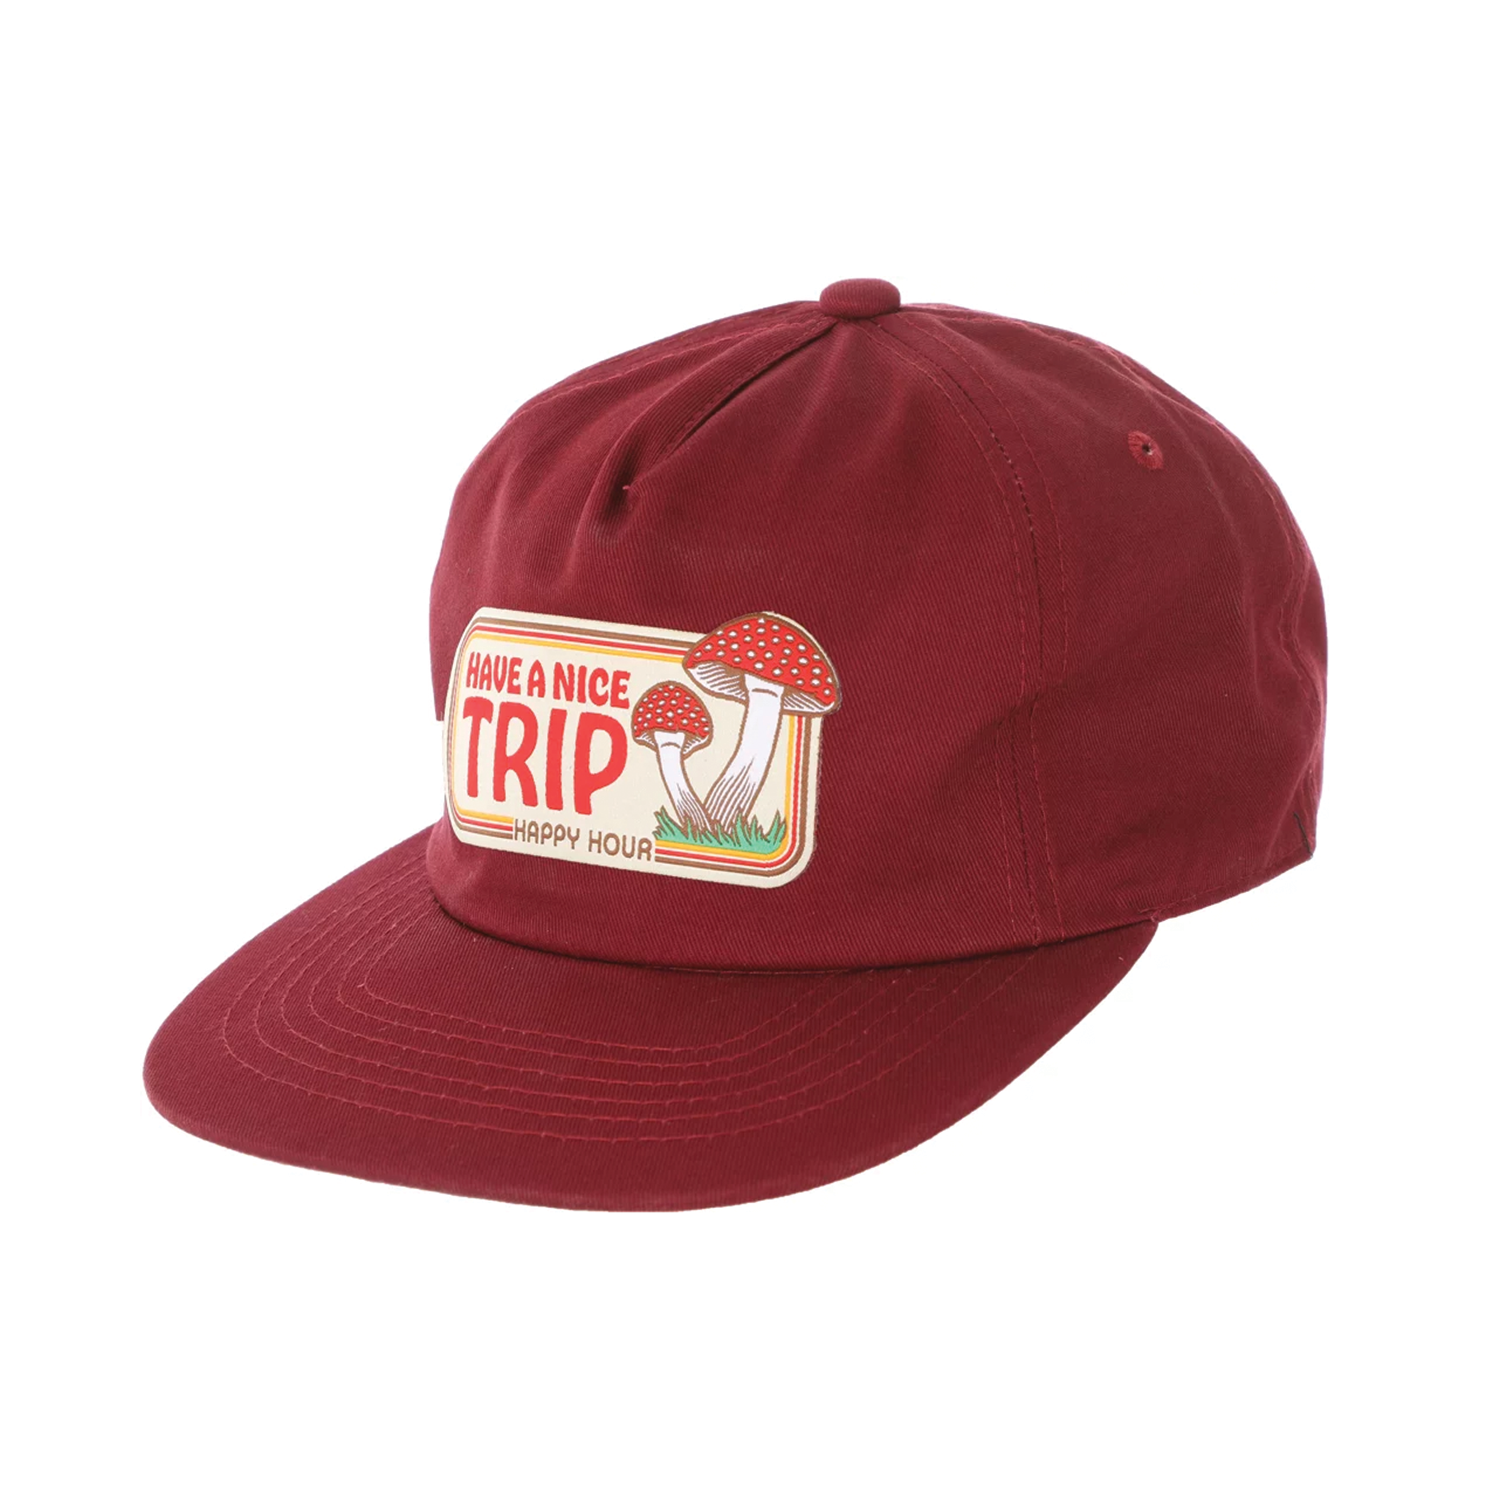 HAPPY HOUR HAVE A NICE TRIP HAT